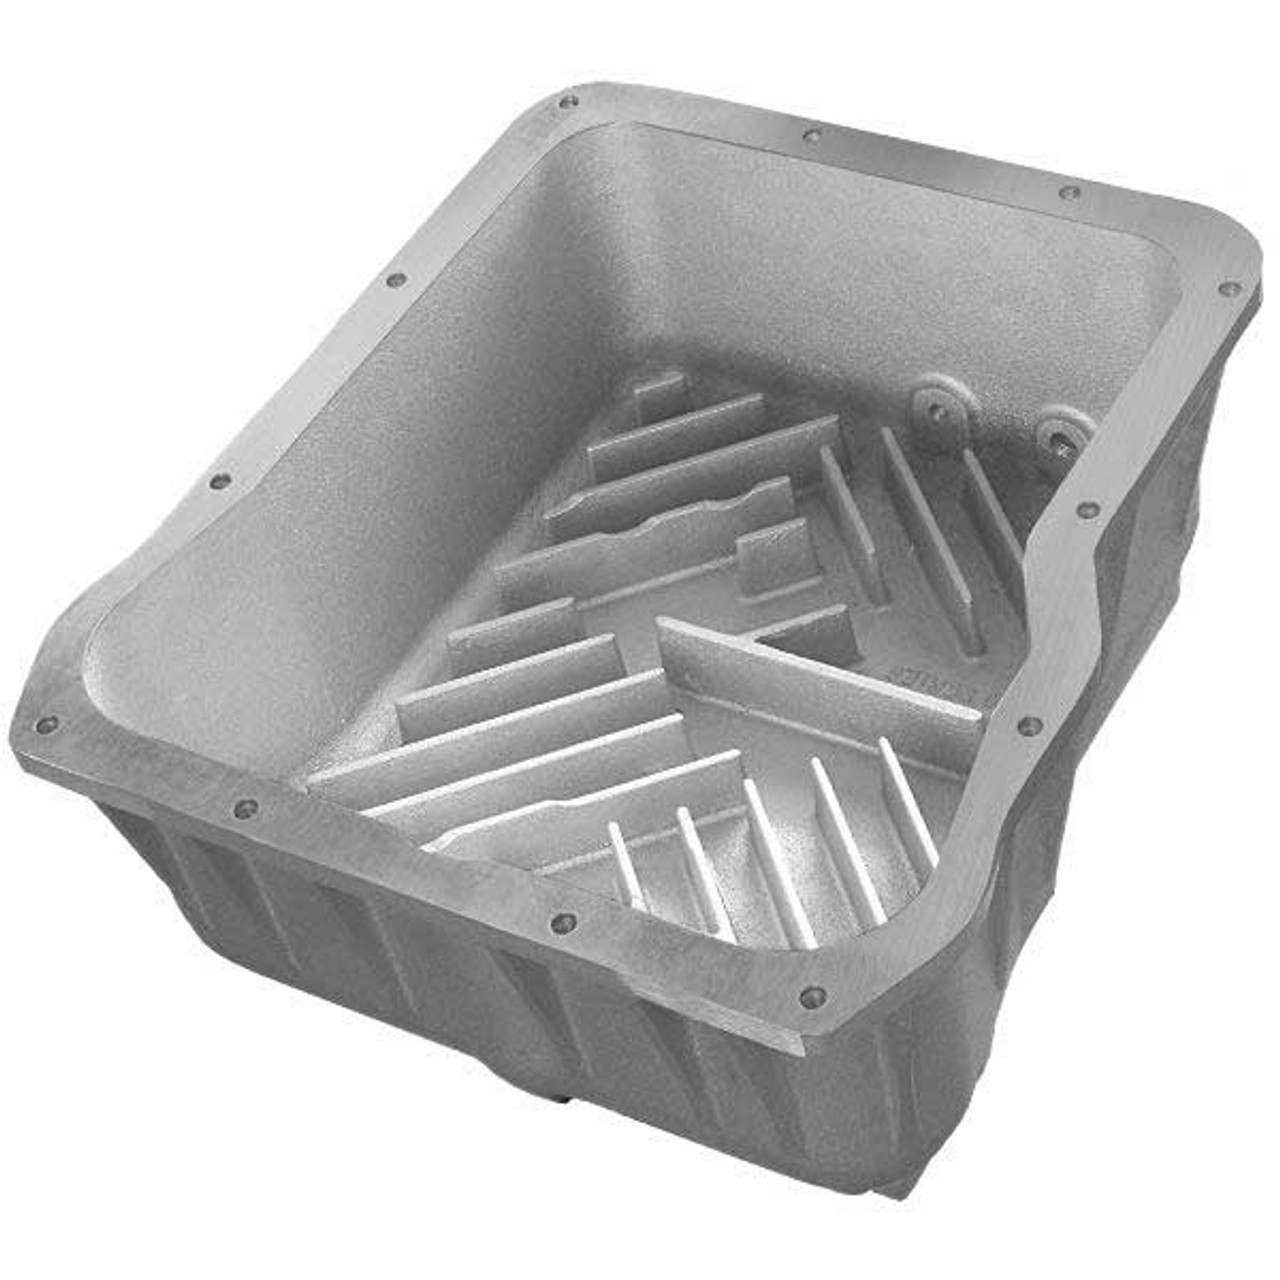  PPE DEEP ALLISON TRANSMISSION PAN - BRUSHED 2001-2019 GM 6.6L DURAMAX (EQUIPPED WITH ALLISON 1000 / 2000 / 2400) (PPE128051010)In Pan View